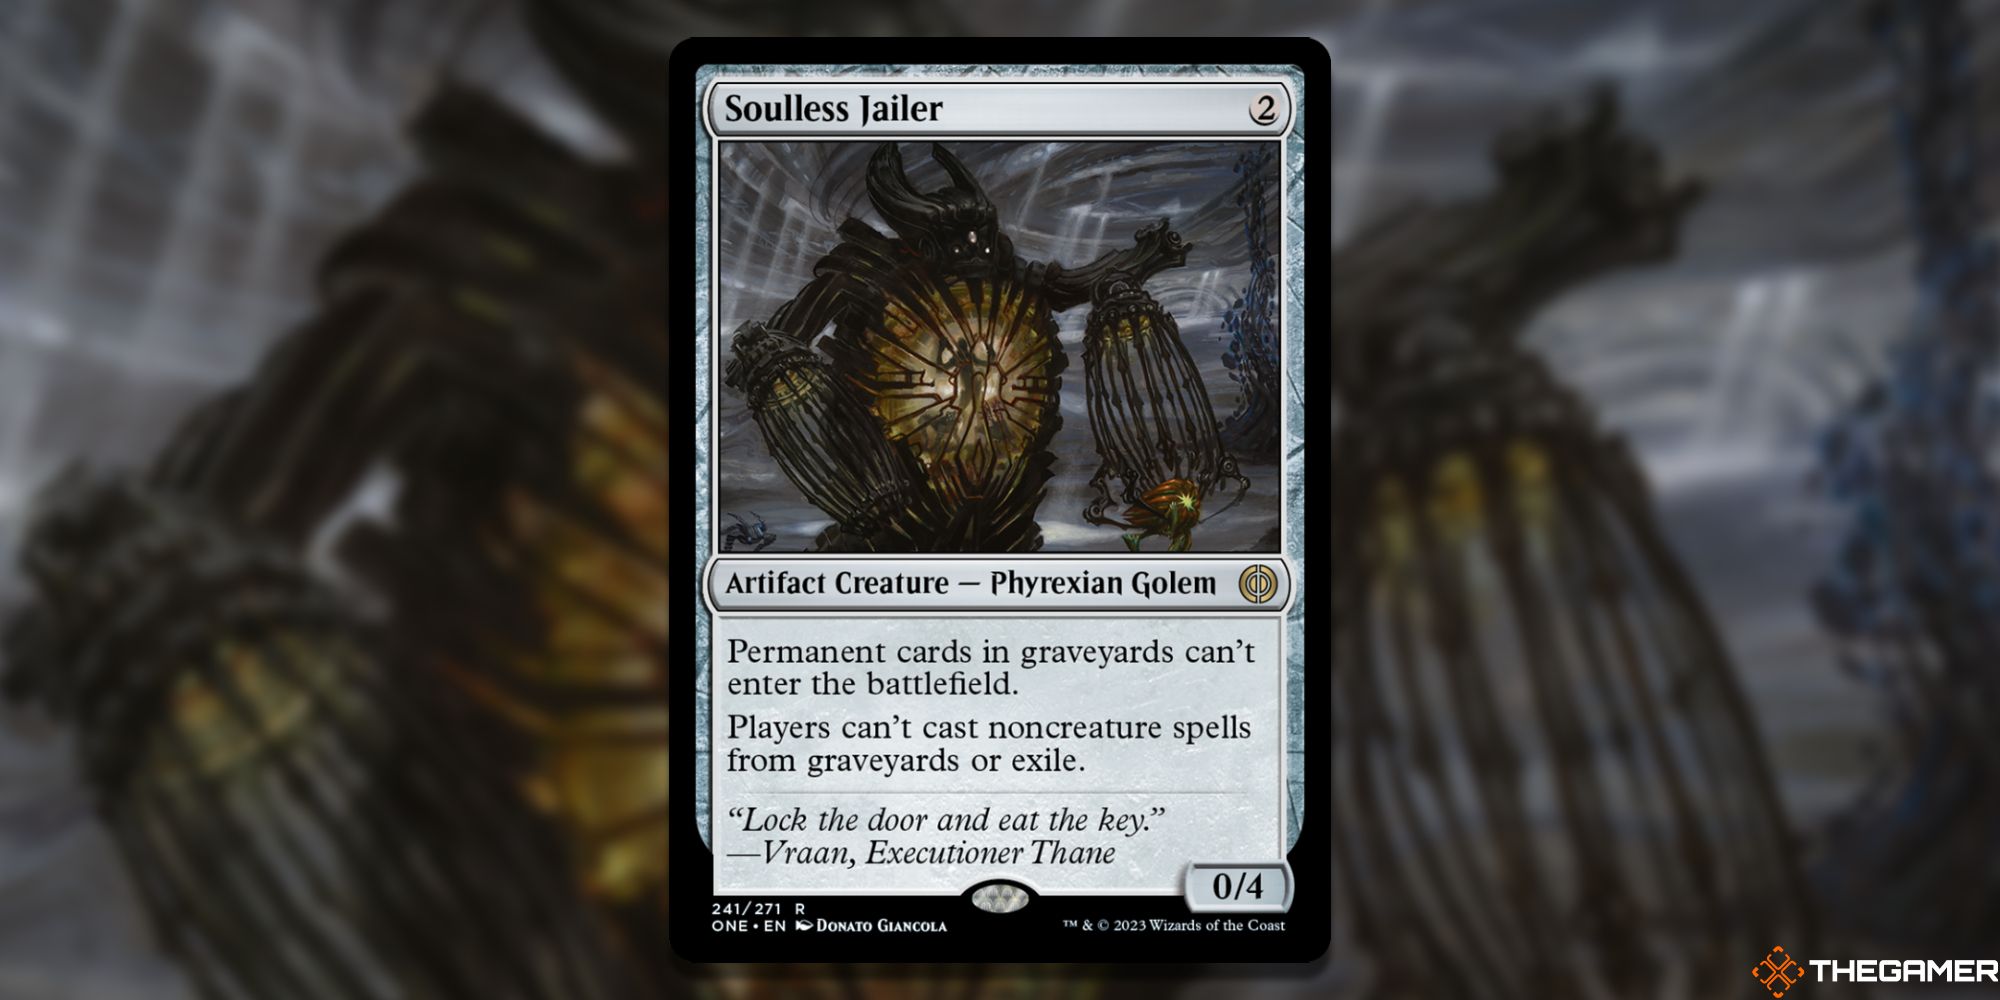 Image of the Soulless Jailer card in Magic: The Gathering, with art by Donato Giancola